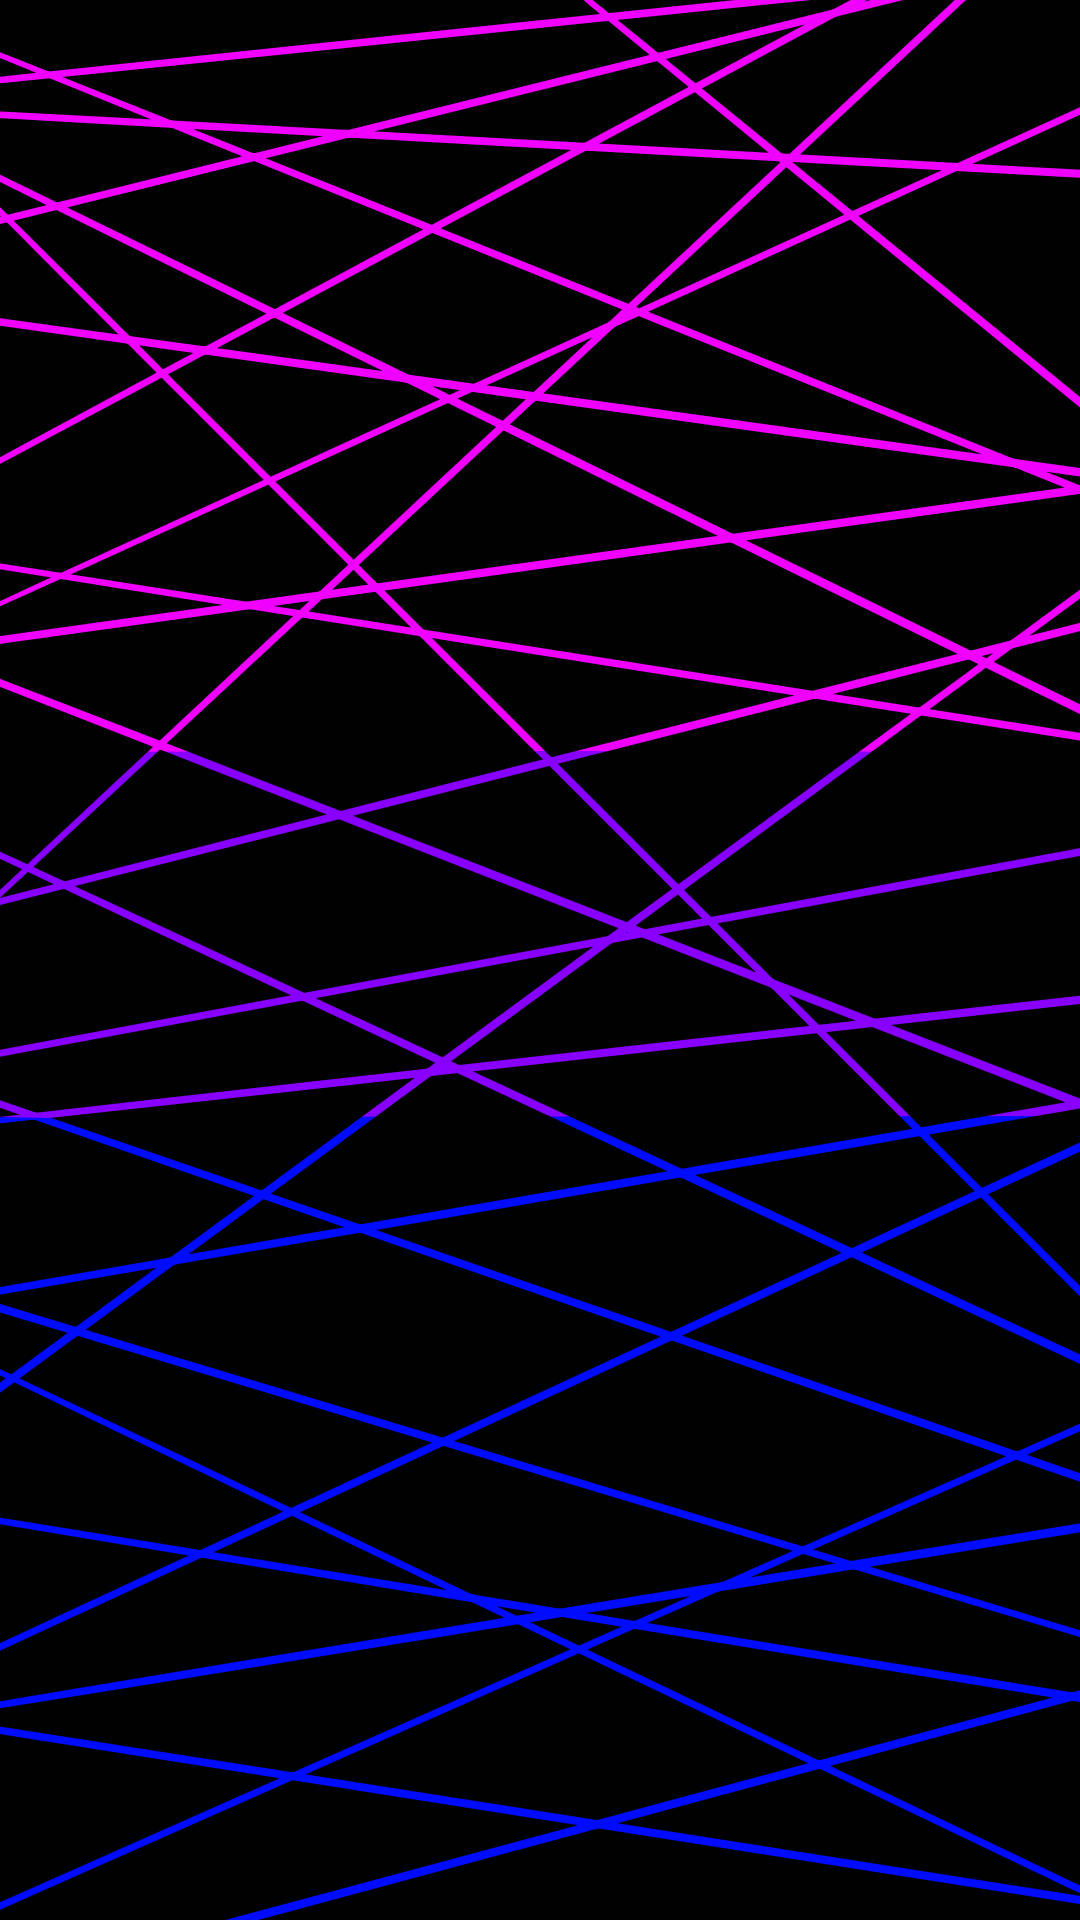 Bisexual Intersecting Lines Background